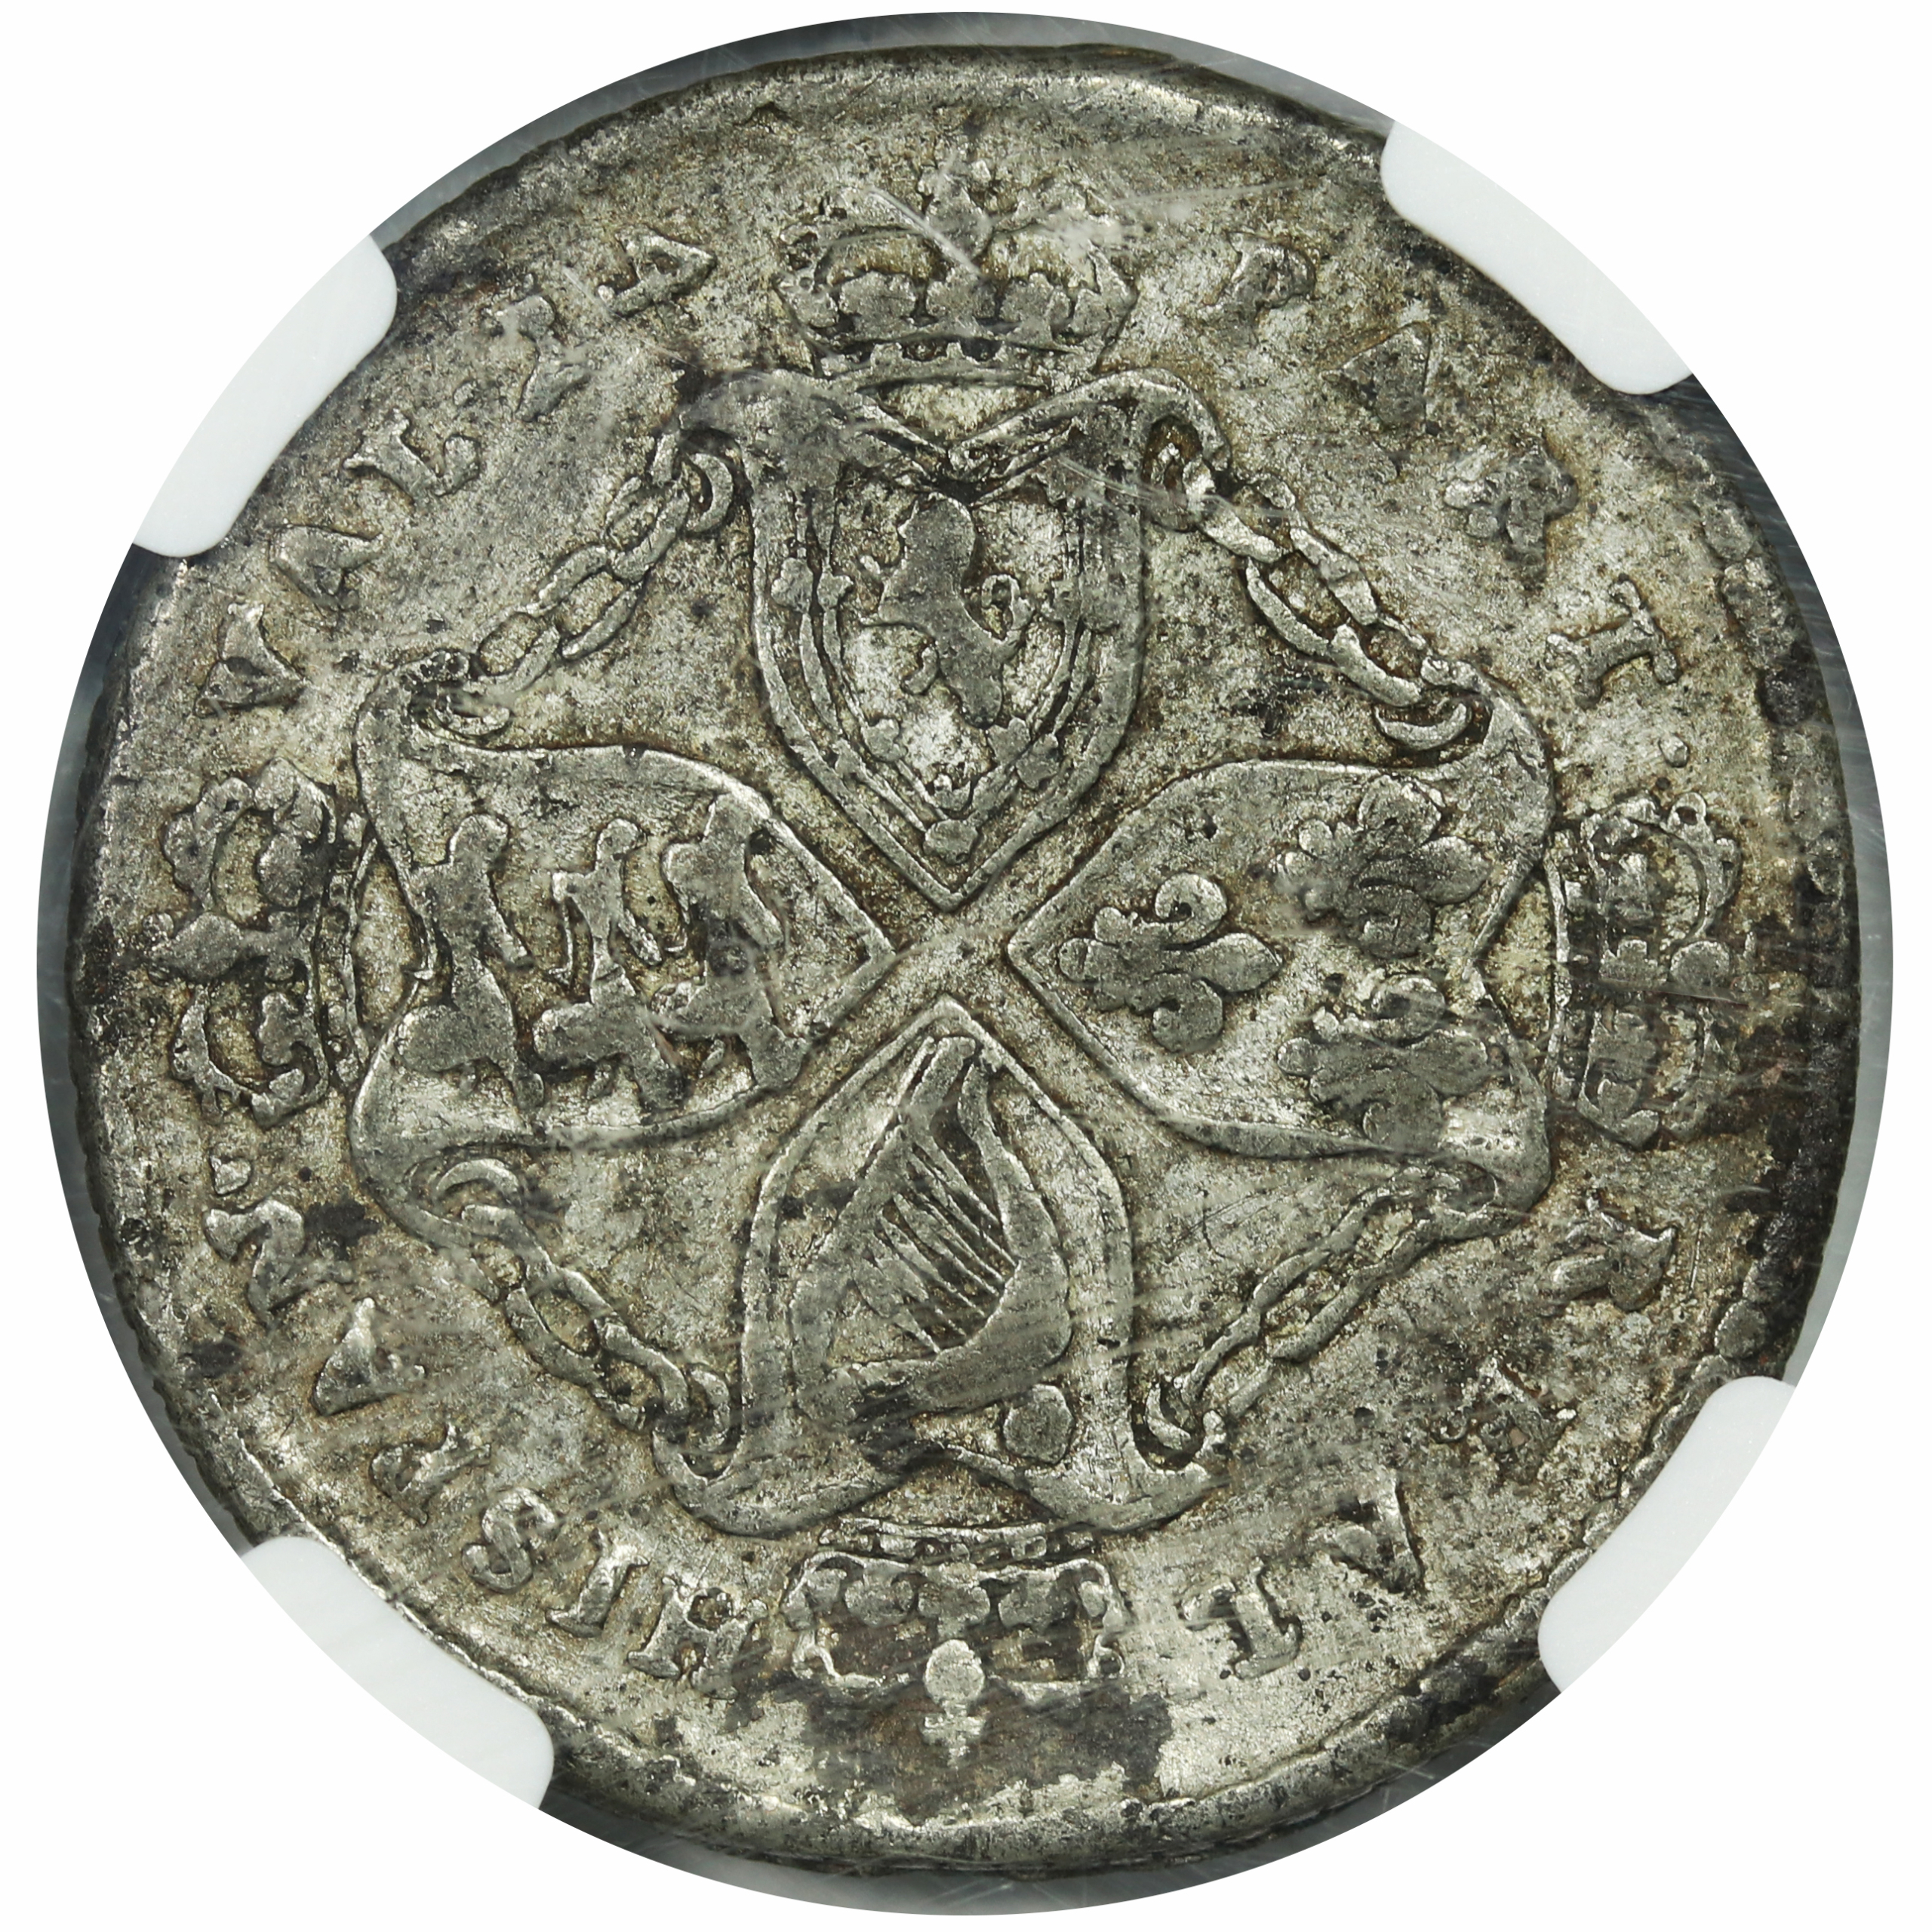 1688 American Plantation Token Reverse Image. Newman 8-C, W-1175 variety, the so-called "Sidewise 4" type Redbook type.  Considered to be Rarity-7.